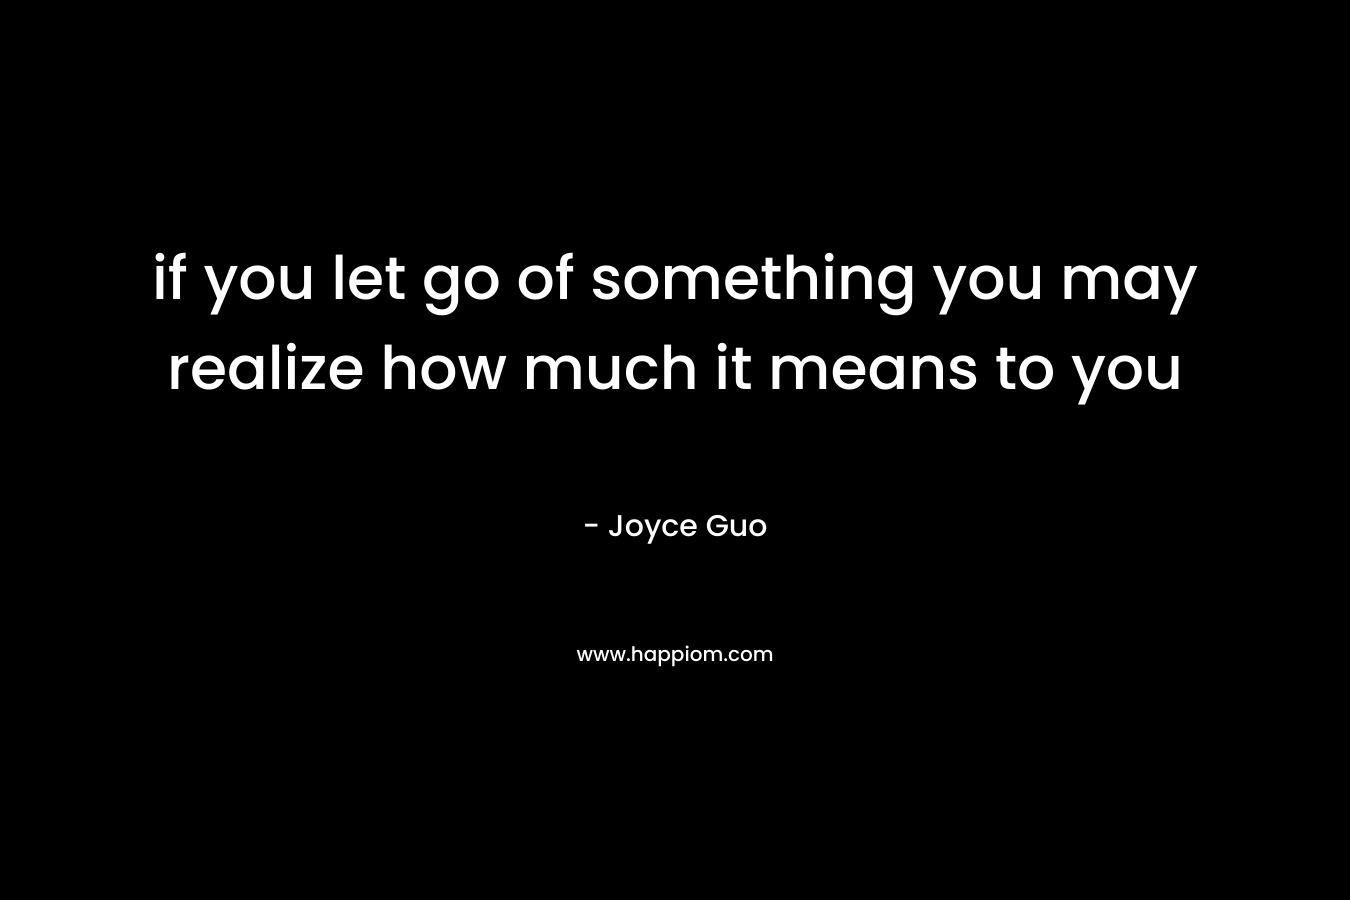 if you let go of something you may realize how much it means to you